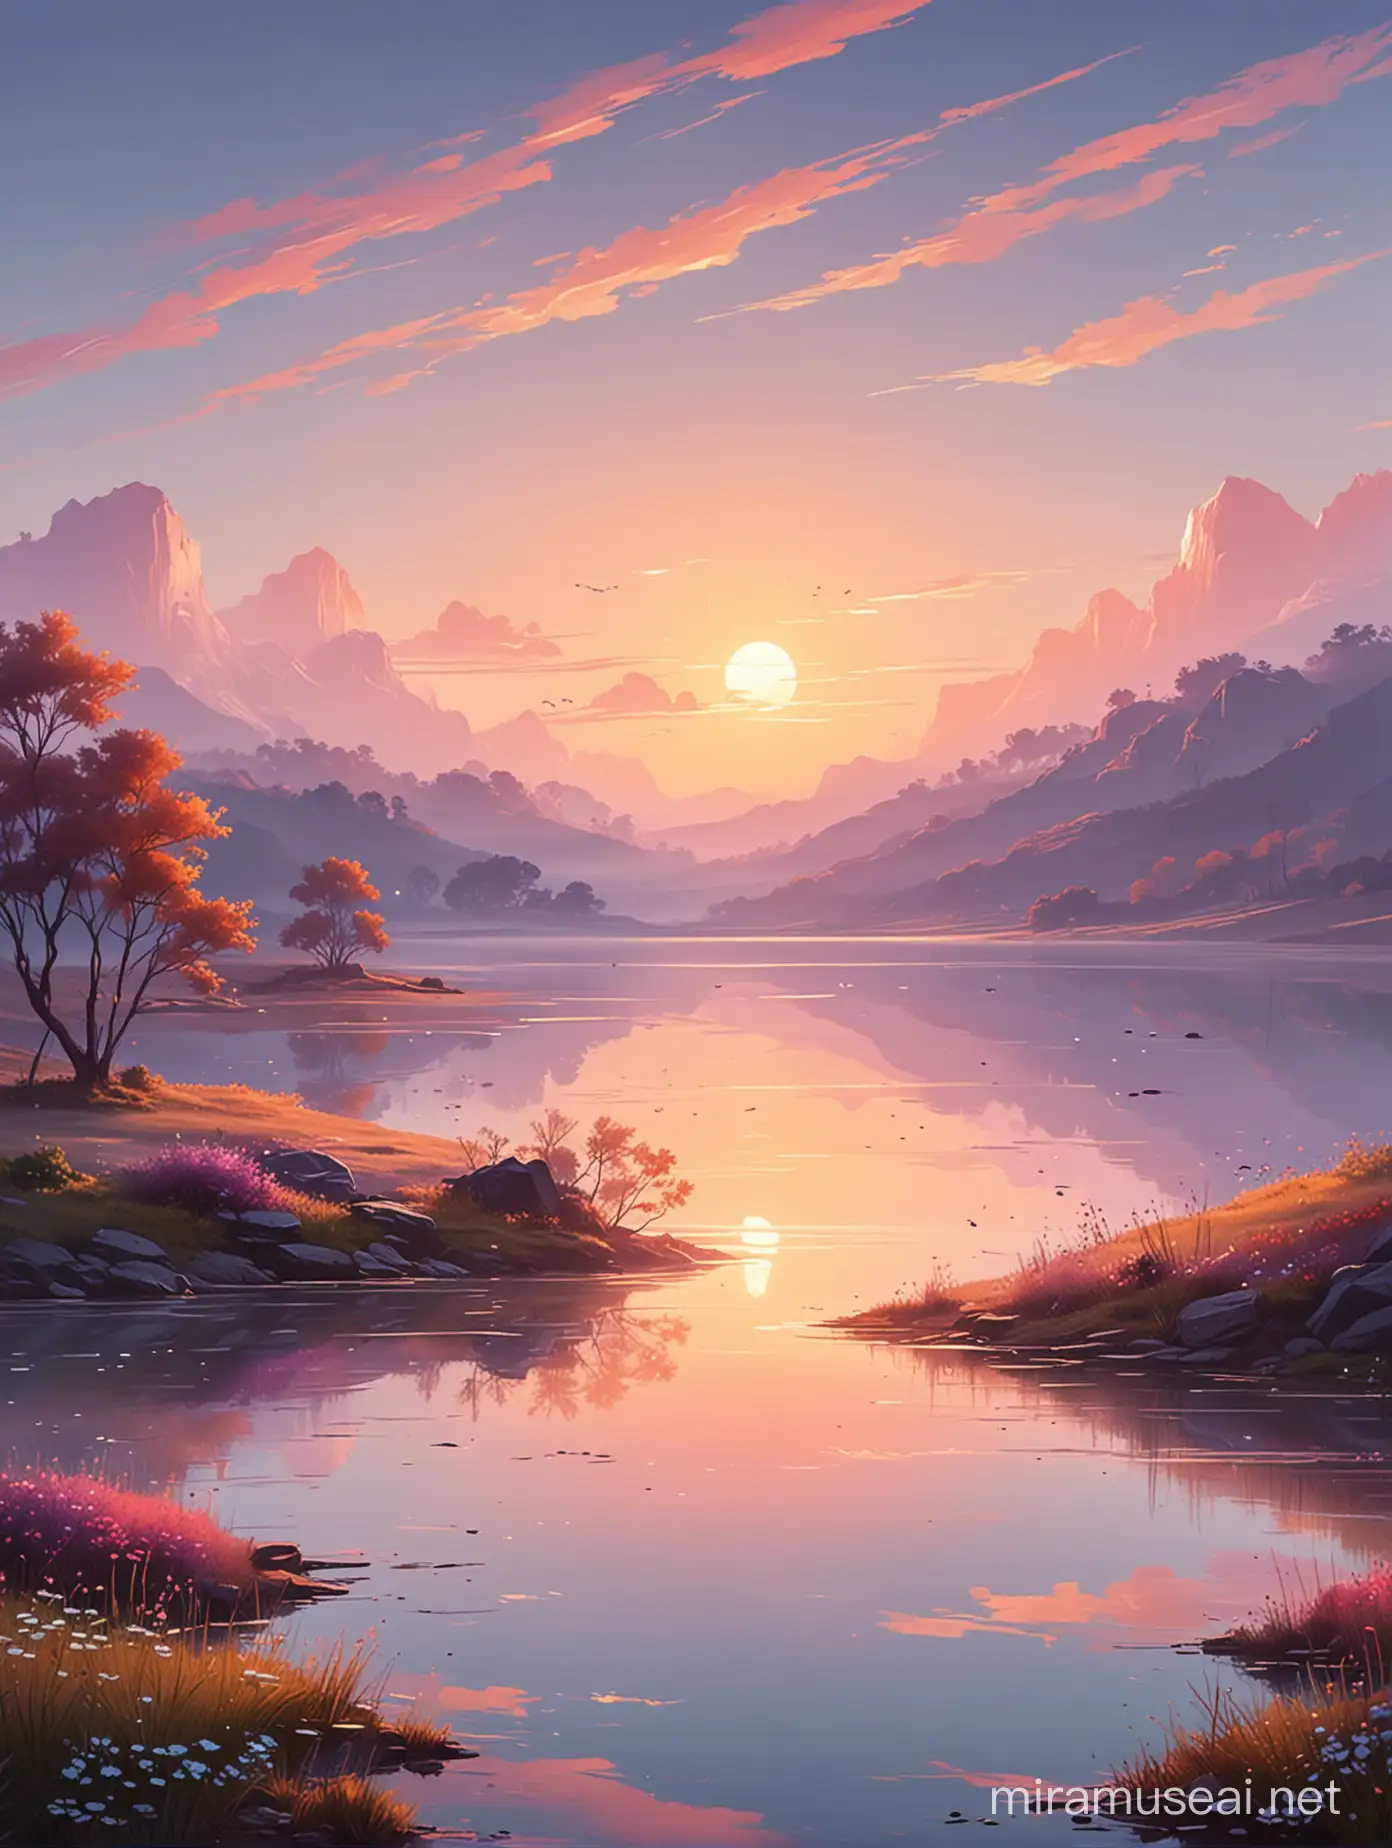 peaceful and calm landscape, aesthetic, abstract style